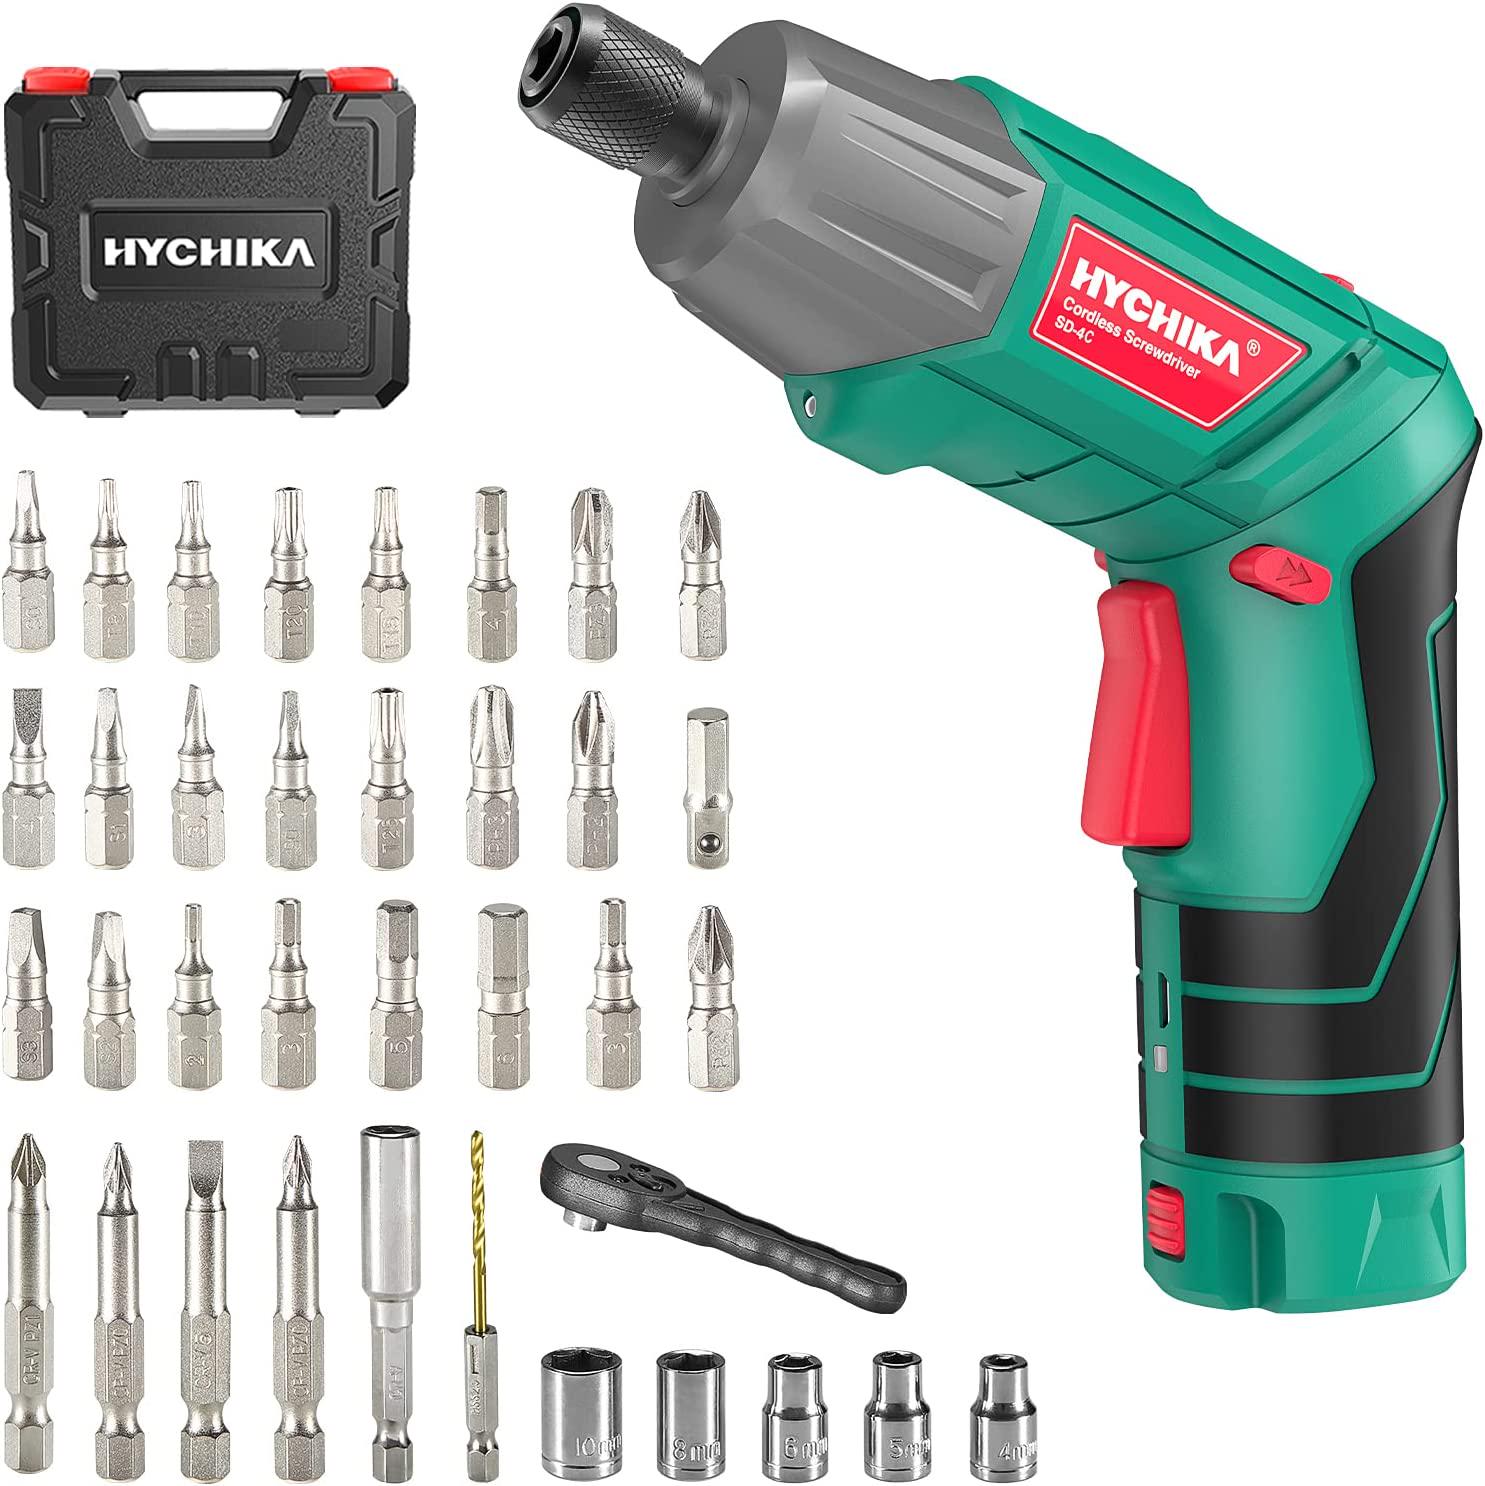 HYCHIKA BETTER TOOLS FOR BETTER LIFE, Electric Screwdriver, 6N·m Max Torque HYCHIKA Cordless Screwdriver 2000mAh 3.6V with 36 Accessories, LED Light and Rear Flashlight, Ratchet Wrench, Charging Adapter with USB Cable and Storage Box